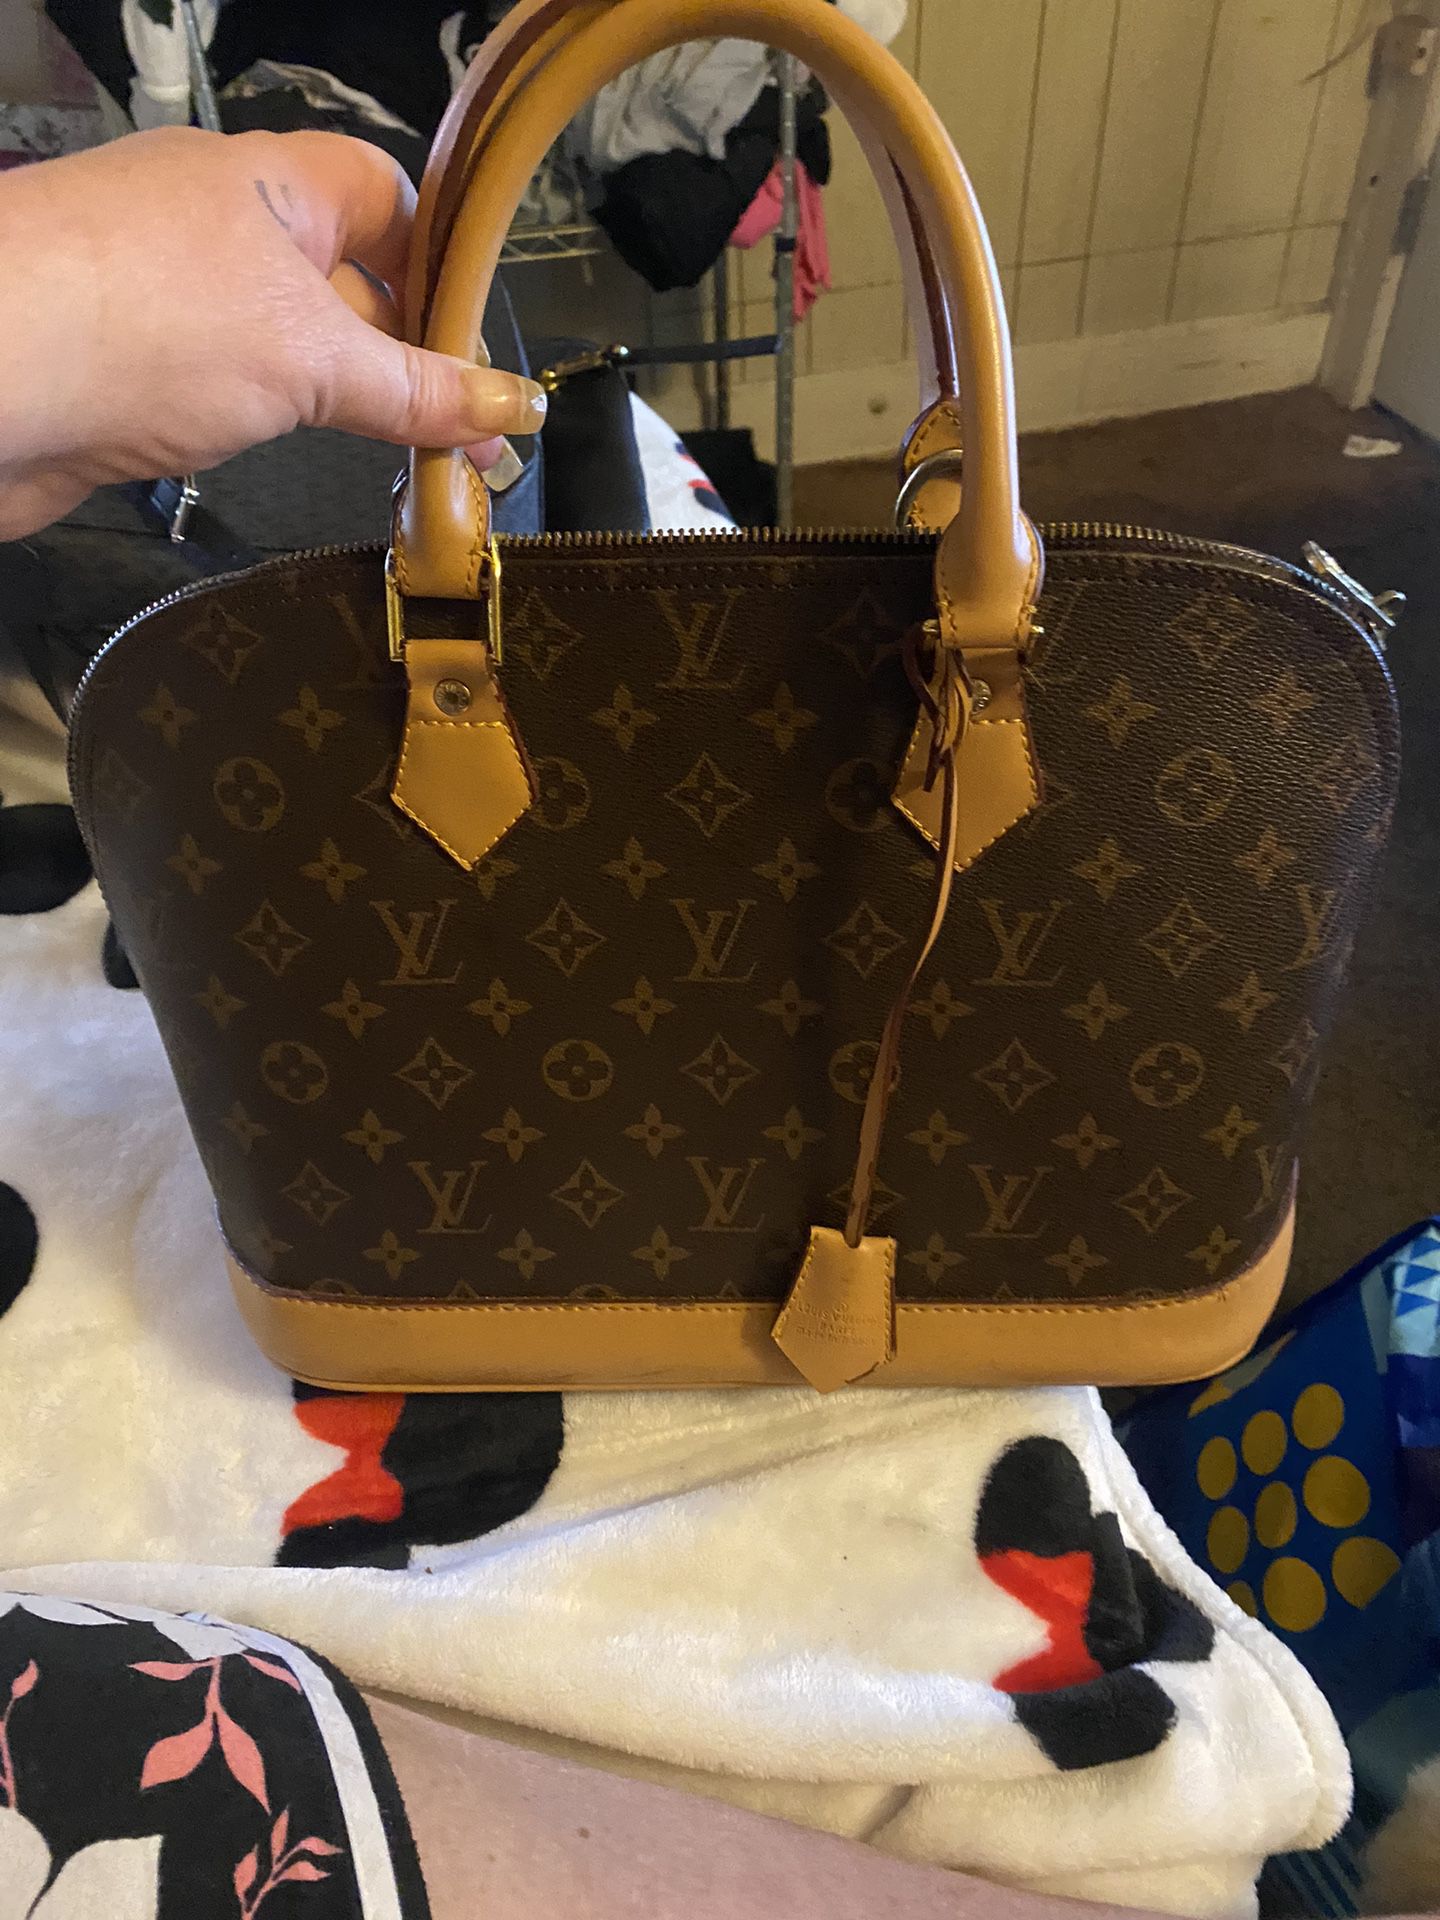 Women bags for sale - New and Used - OfferUp